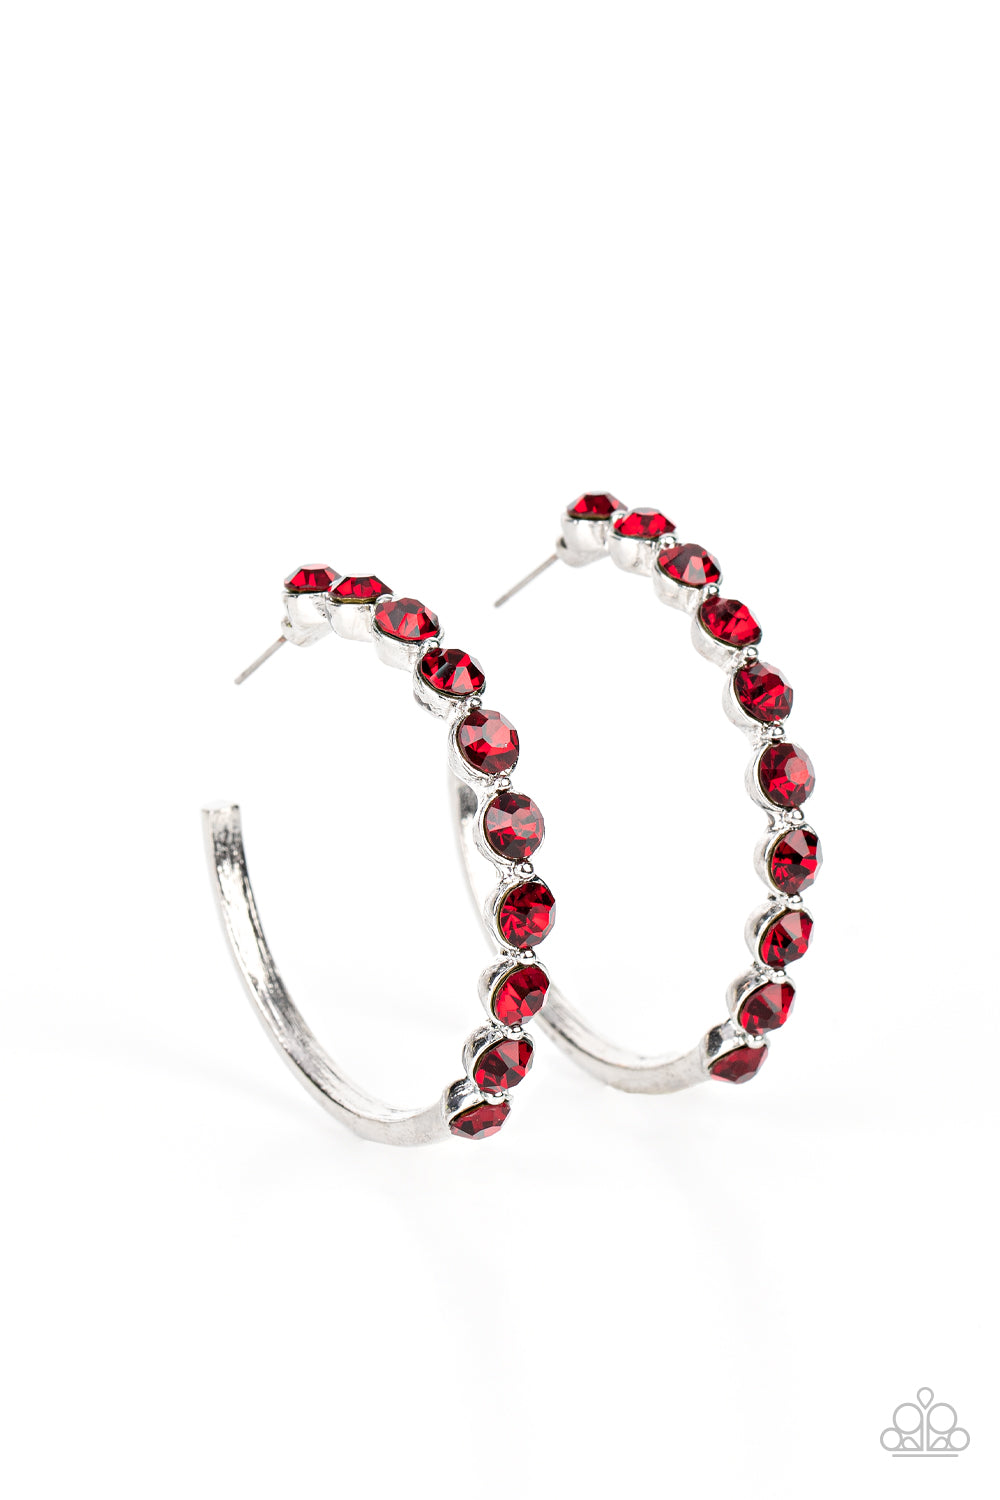 Photo Finish Red Rhinestone Hoop Earring - Paparazzi Accessories  The front of a bold silver hoop is encrusted in fiery red rhinestones, creating a glamorous pop of sparkle. Earring attaches to a standard post fitting. Hoop measures approximately 1 3/4" in diameter.  Sold as one pair of hoop earrings.